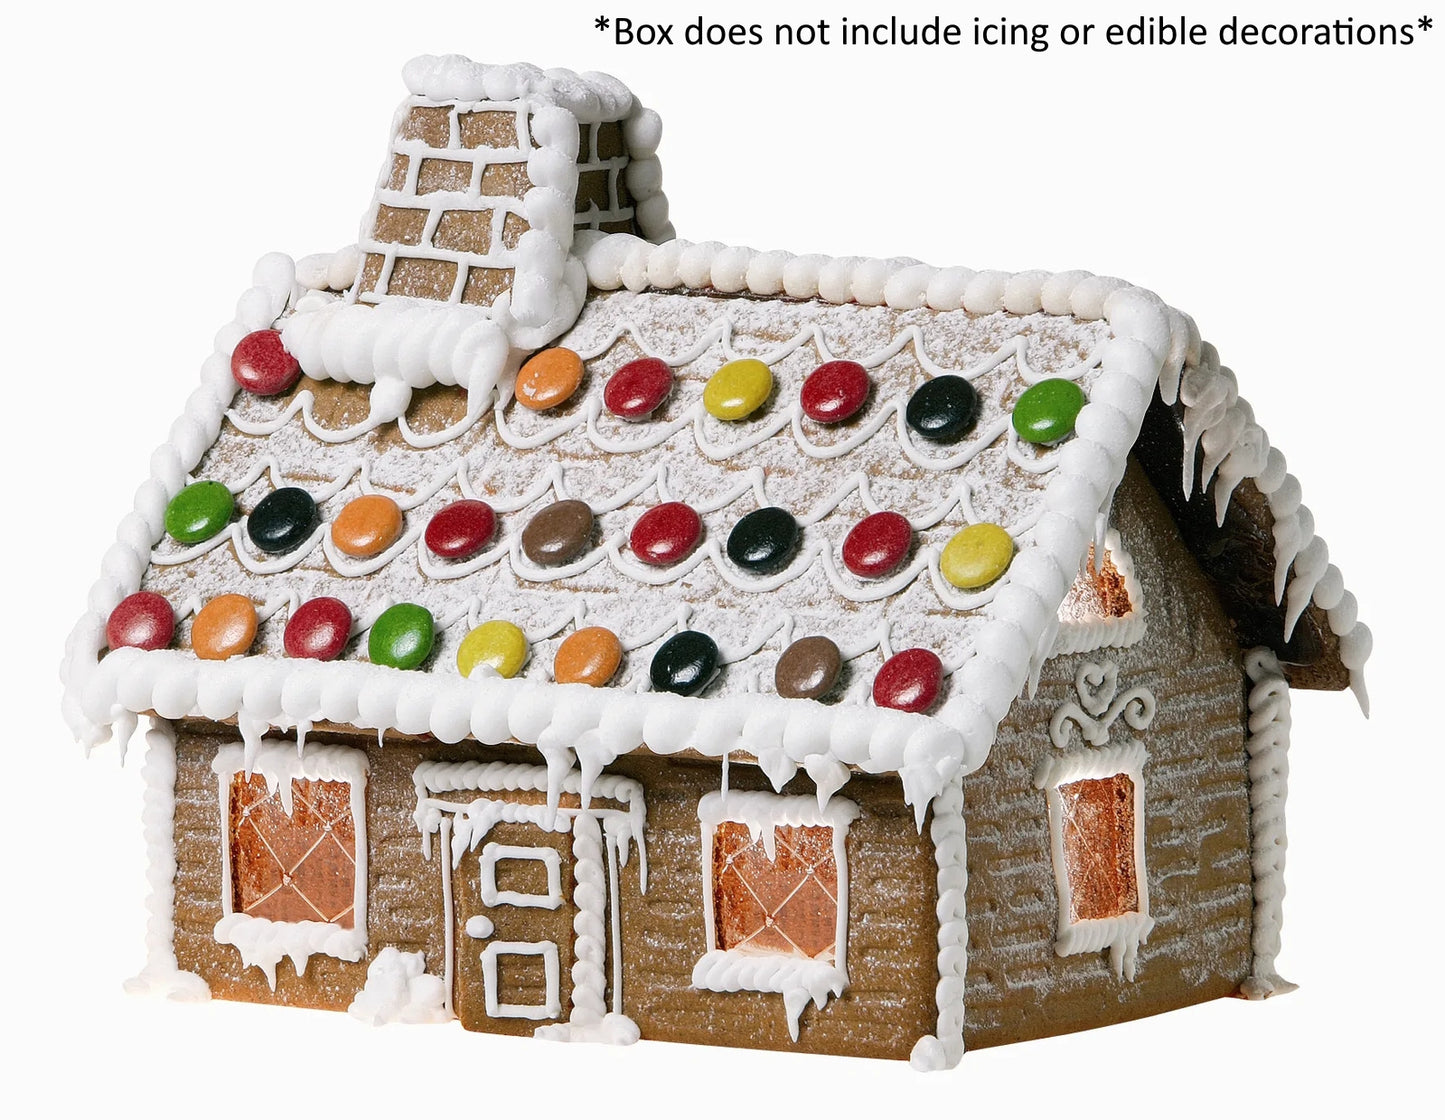 Gingerbread house 300g